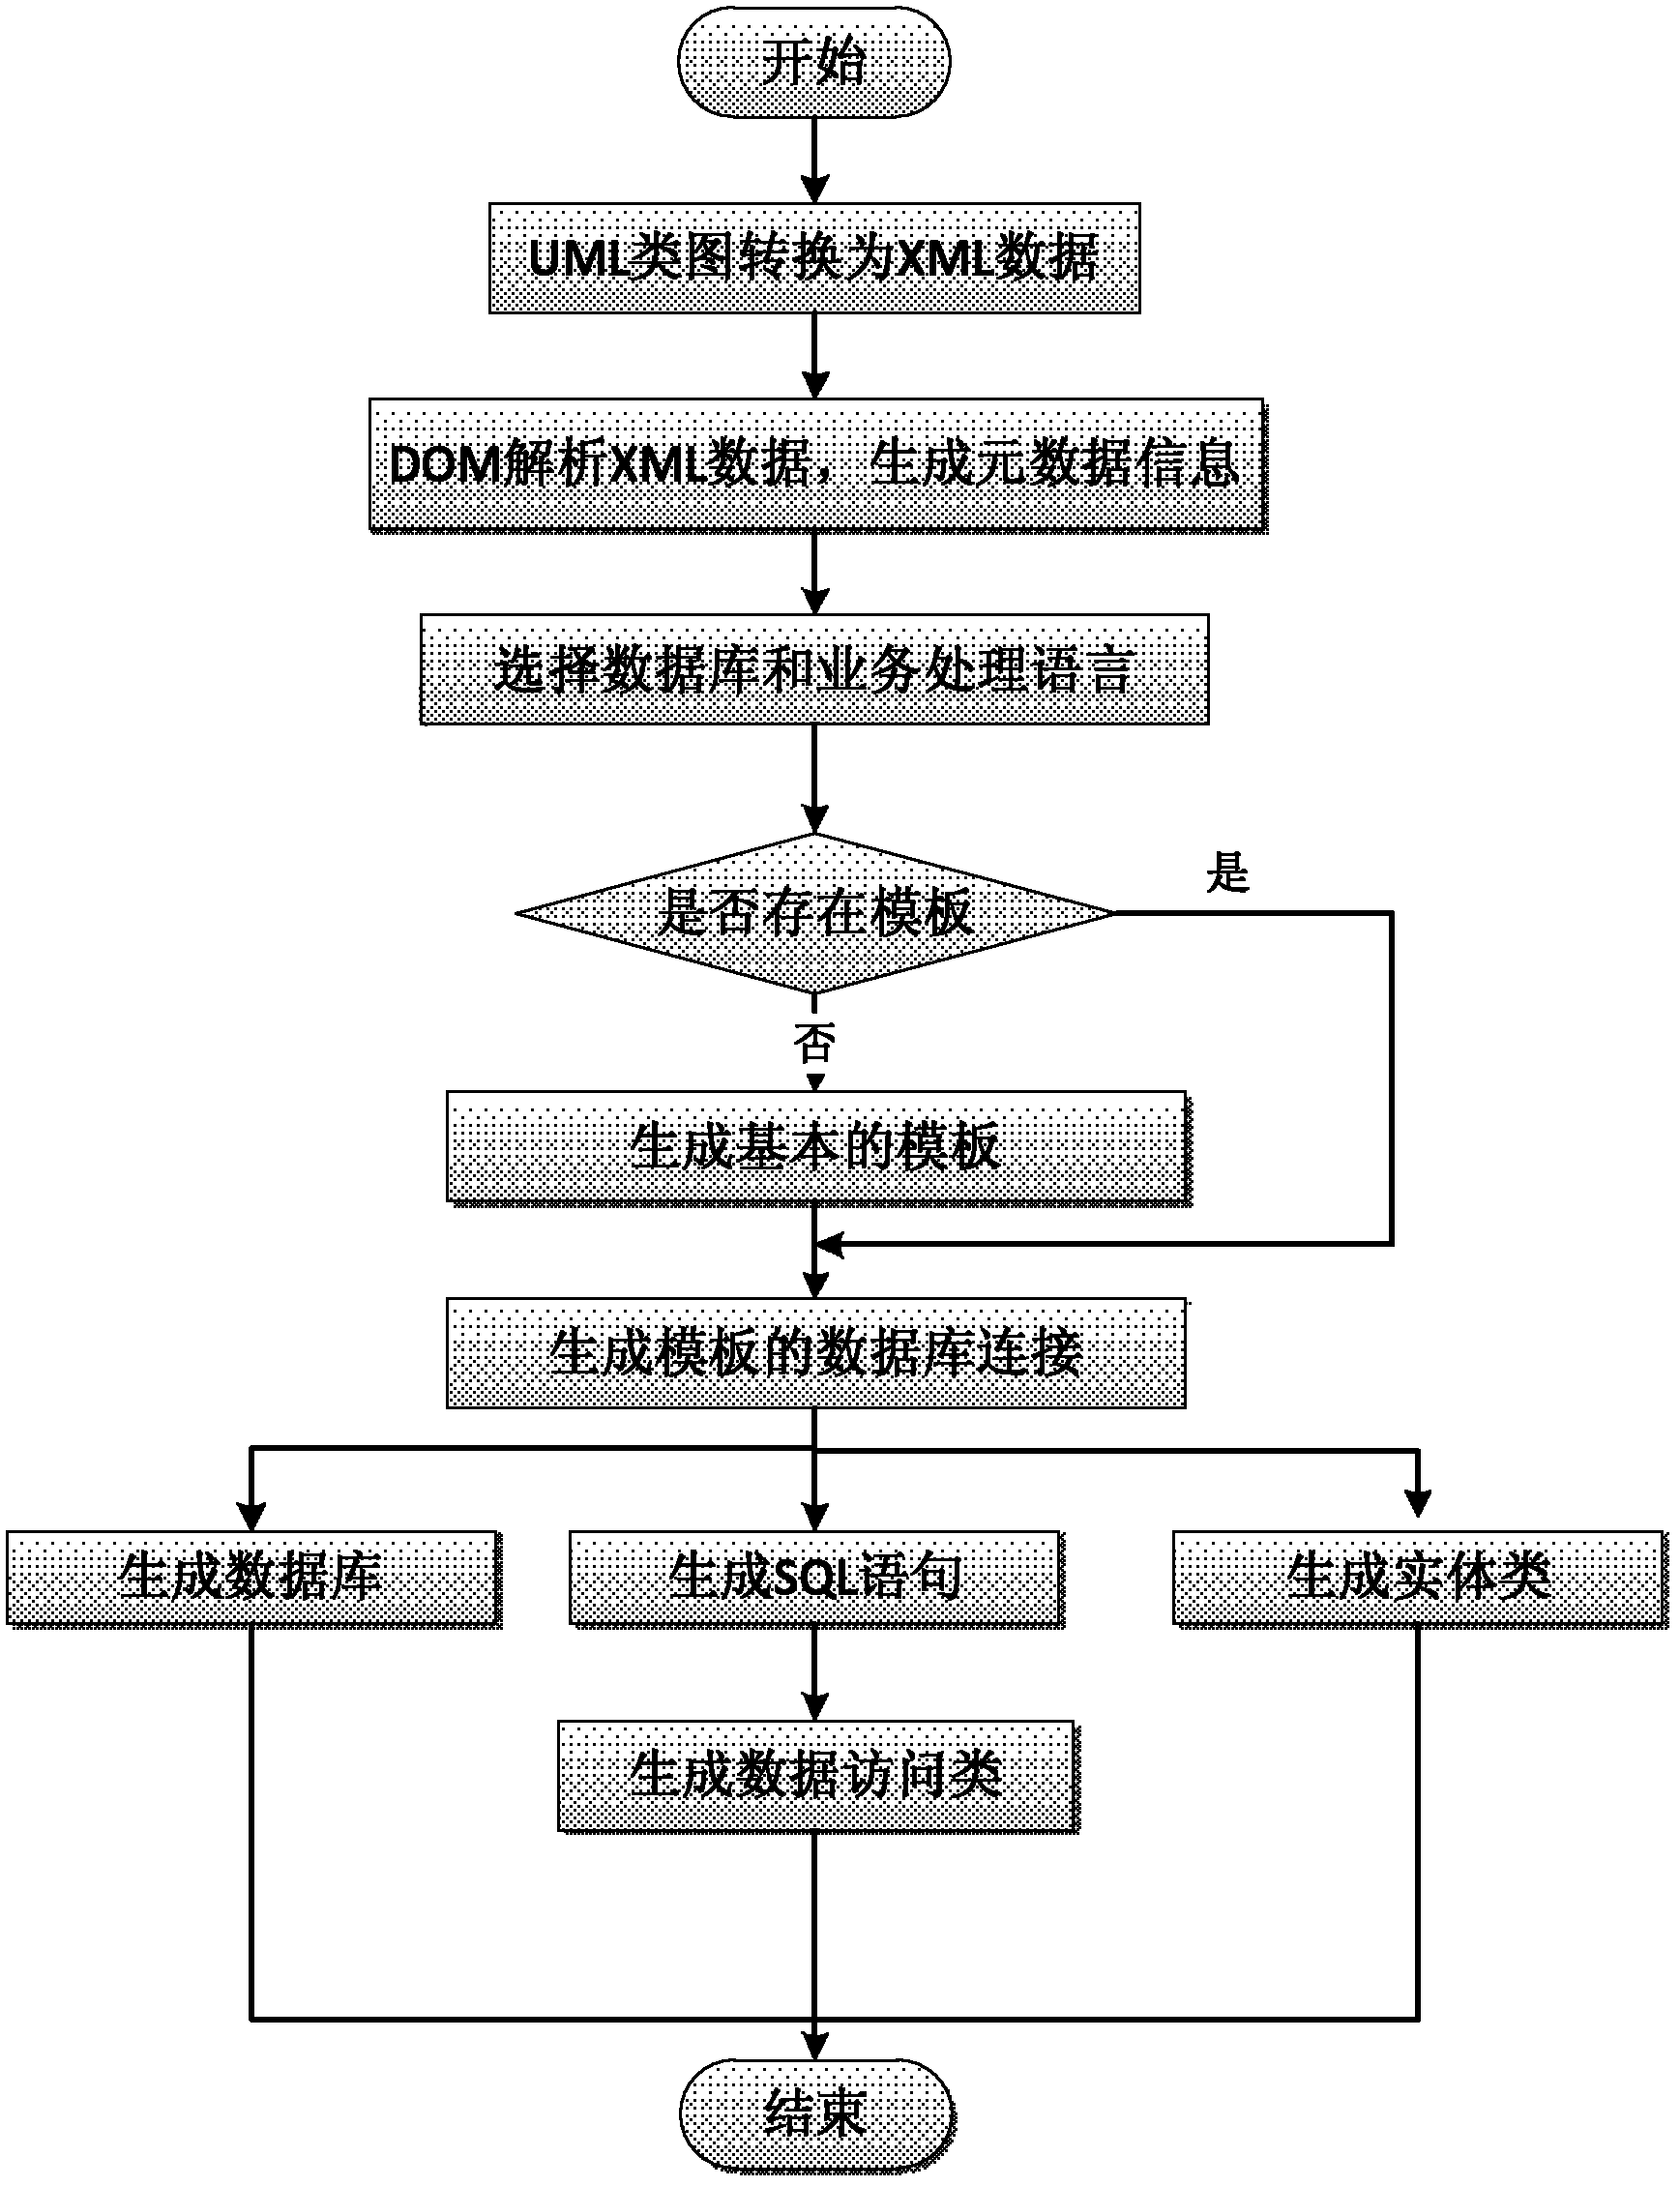 Configurable method for automatically generating database and accessing data